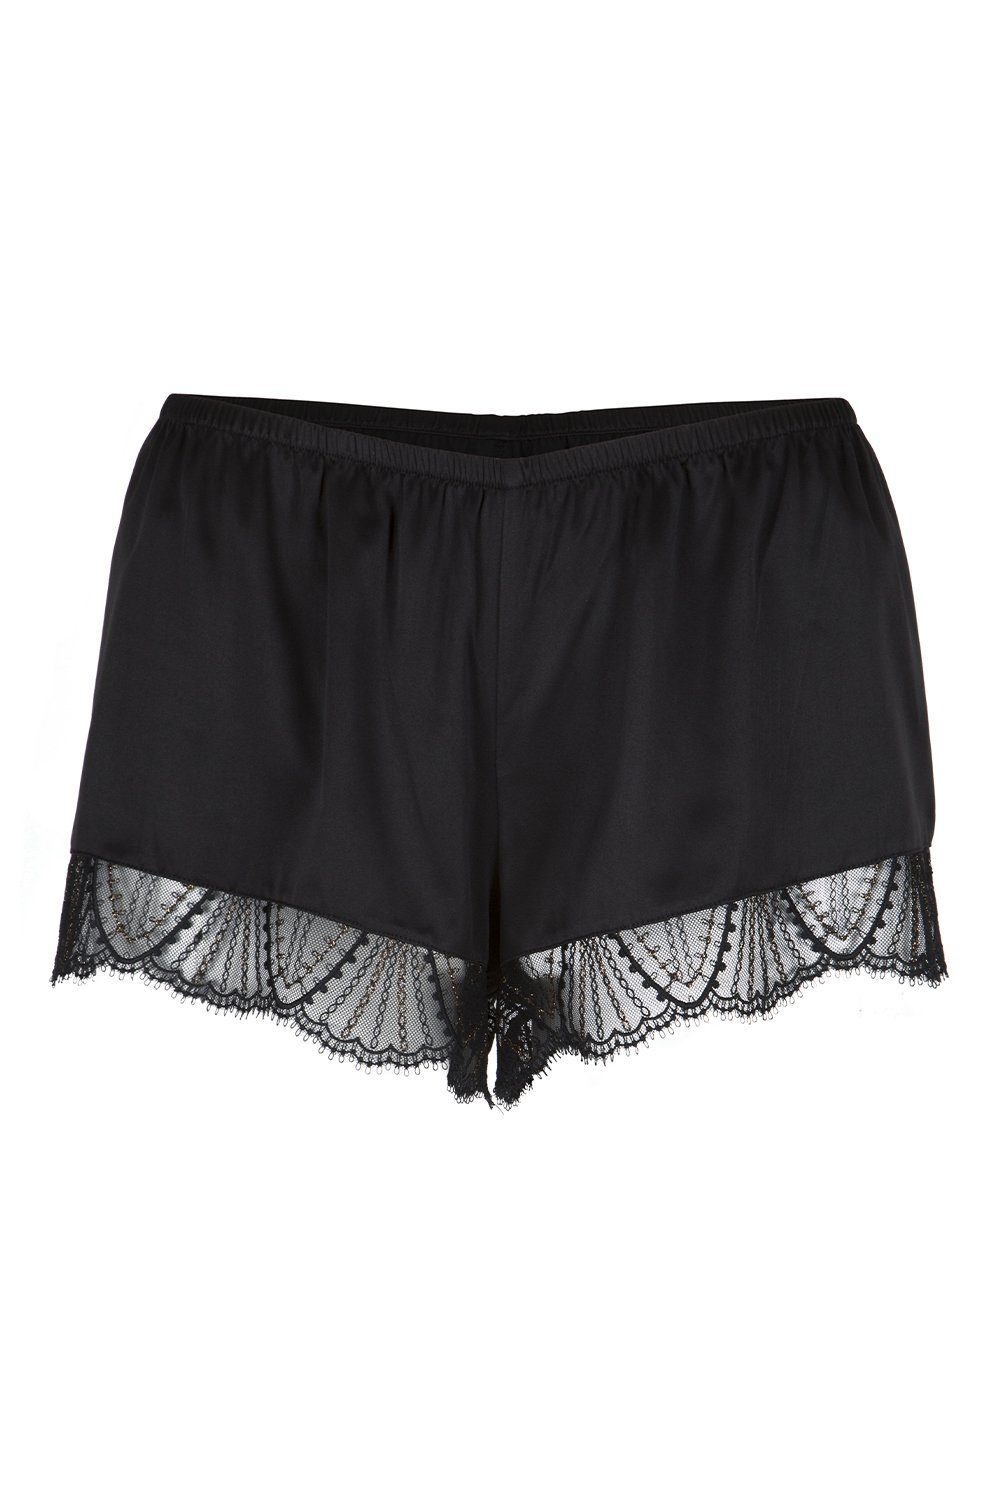 LingaDore Shorts French Knickers 6206FK